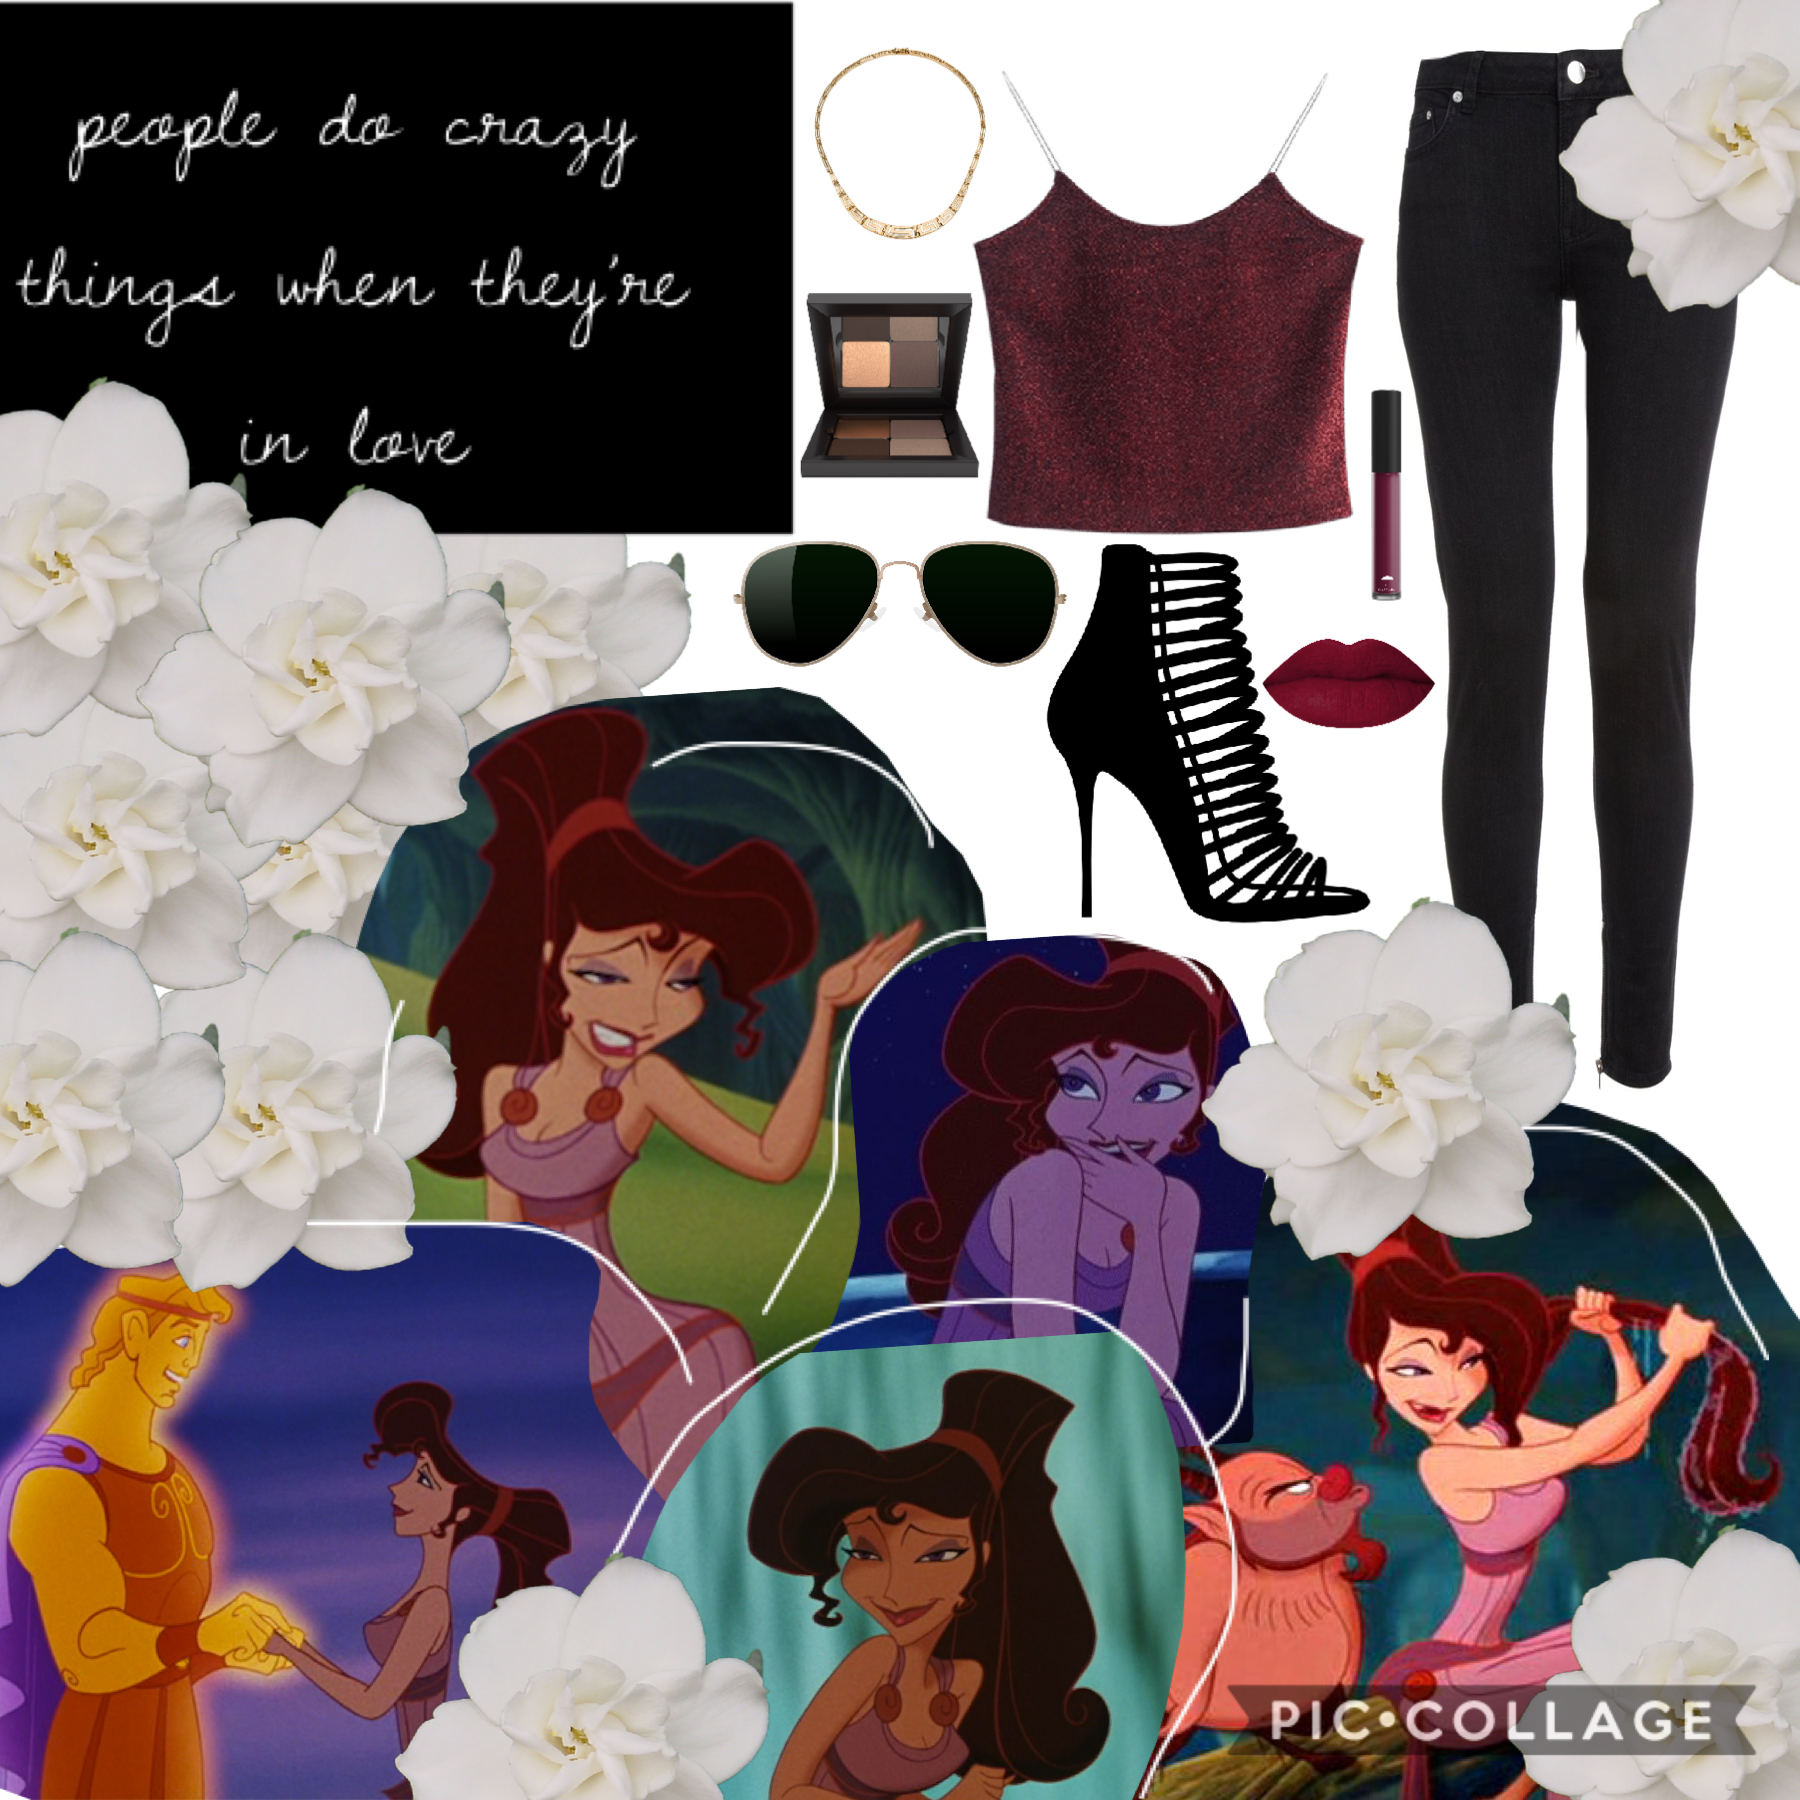 people do crazy things... when they’re in love
#megara#meg#fashion#disney#outfits#basic#aethetic#classic#love#hercules#heroine#feminist